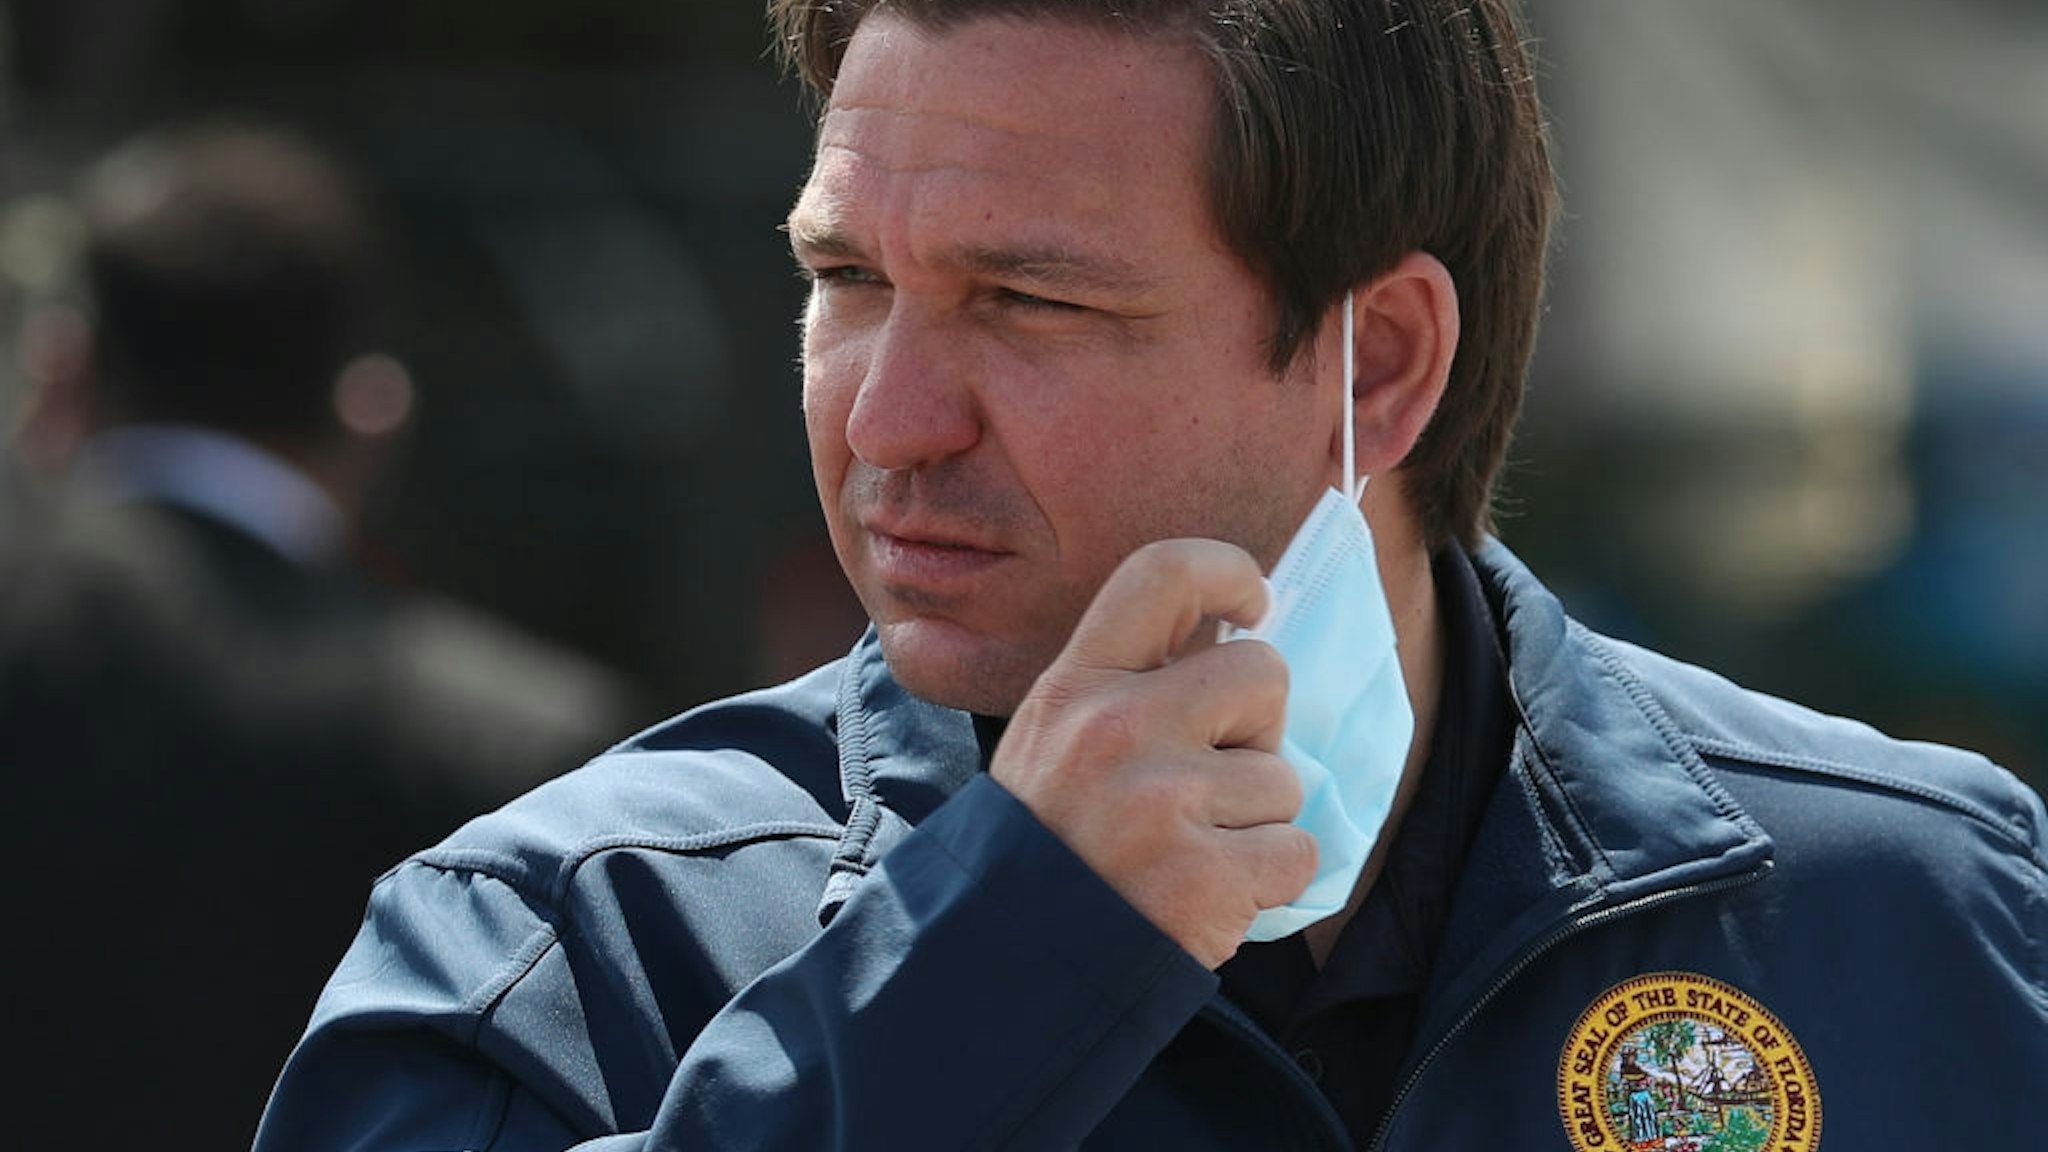 Florida Gov. Ron DeSantis takes his mask off as he prepares to speak during a press conference at the Hard Rock Stadium testing site on May 06, 2020 in Miami Gardens, Florida.